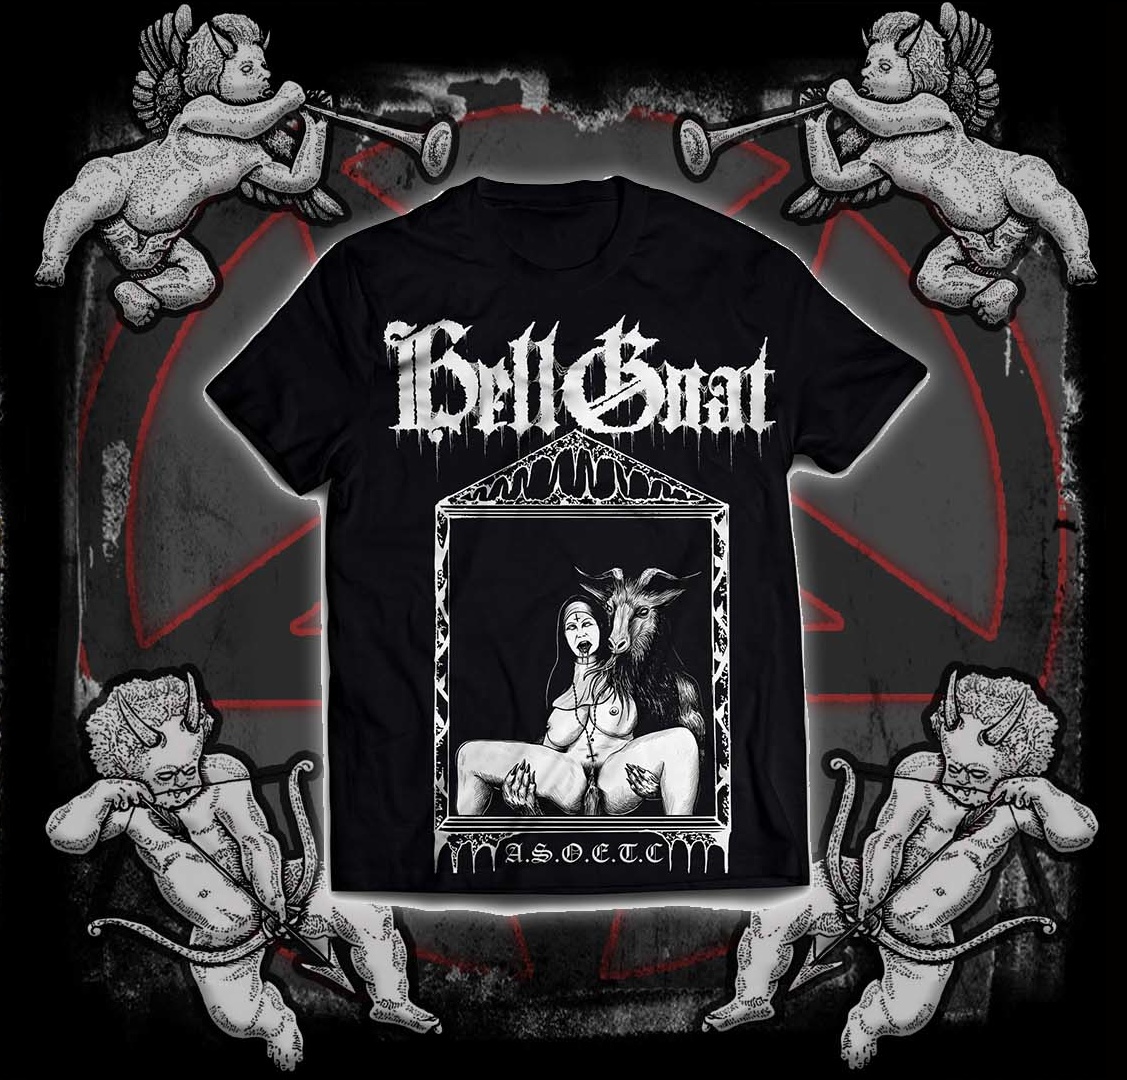 HellGoat - A Sign of Evil to come [Shirt]